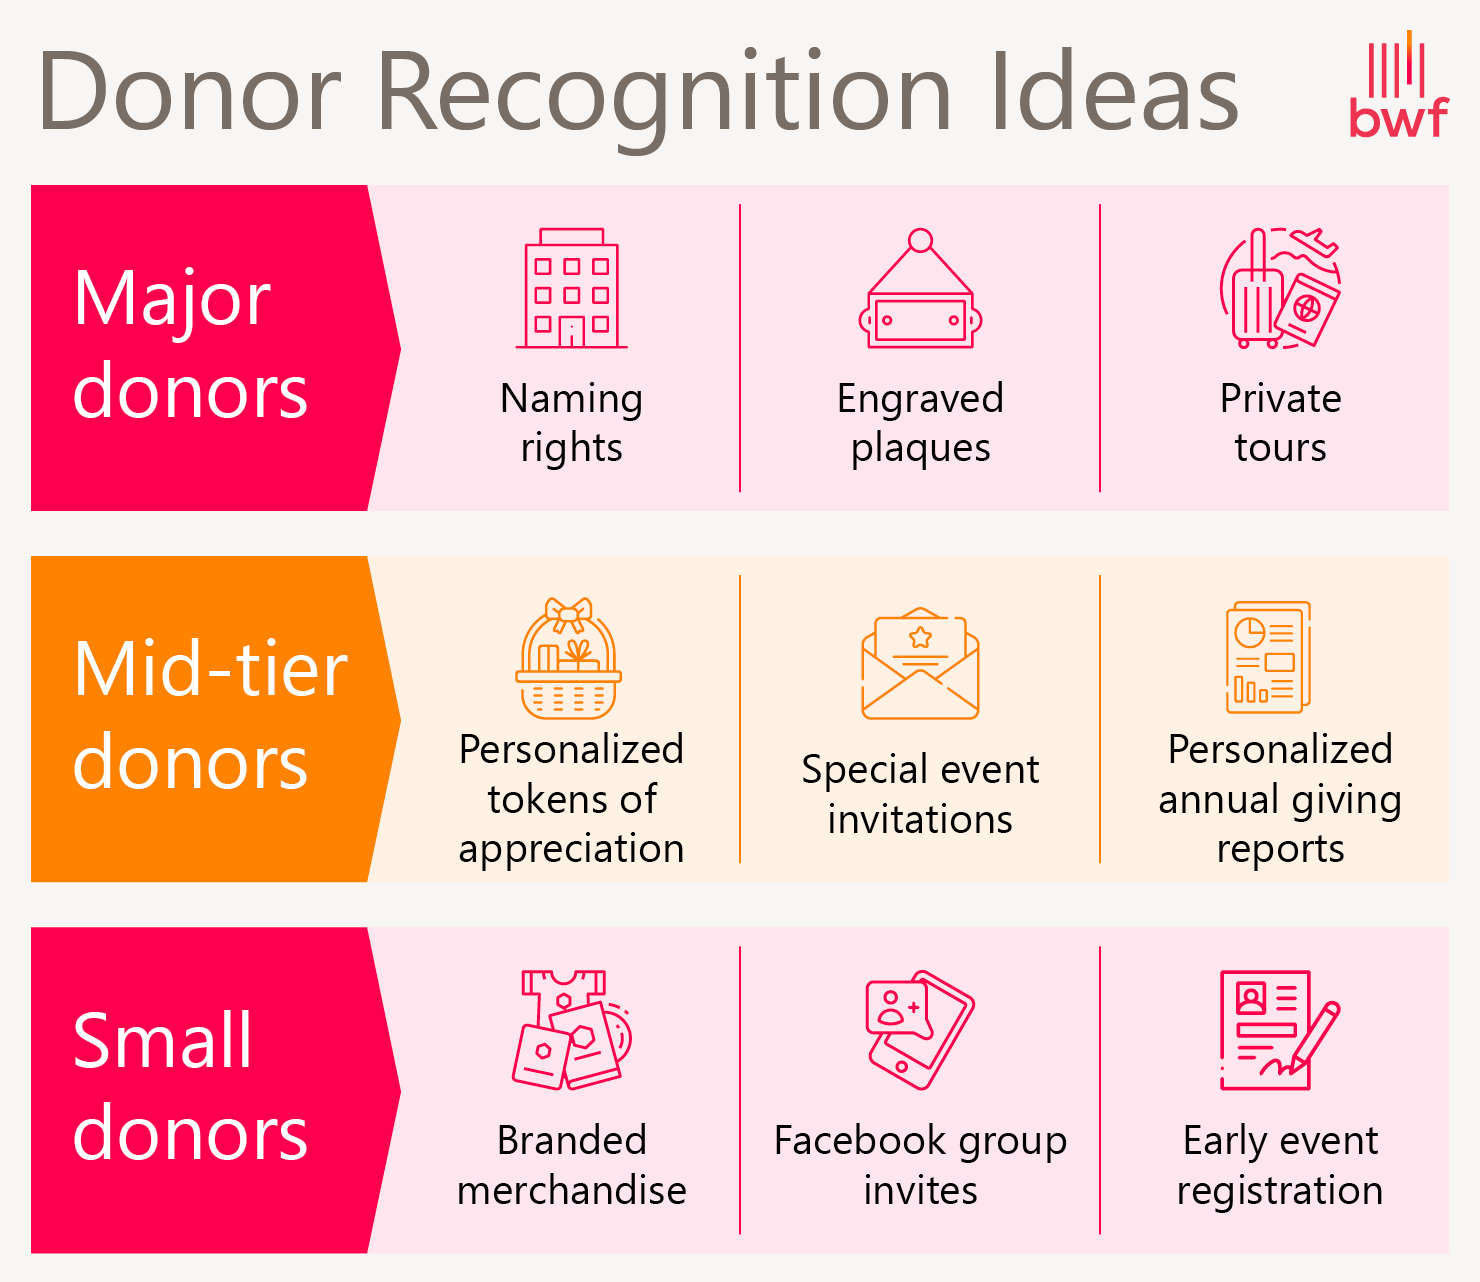 Donor recognition ideas for comprehensive campaign donors at different levels